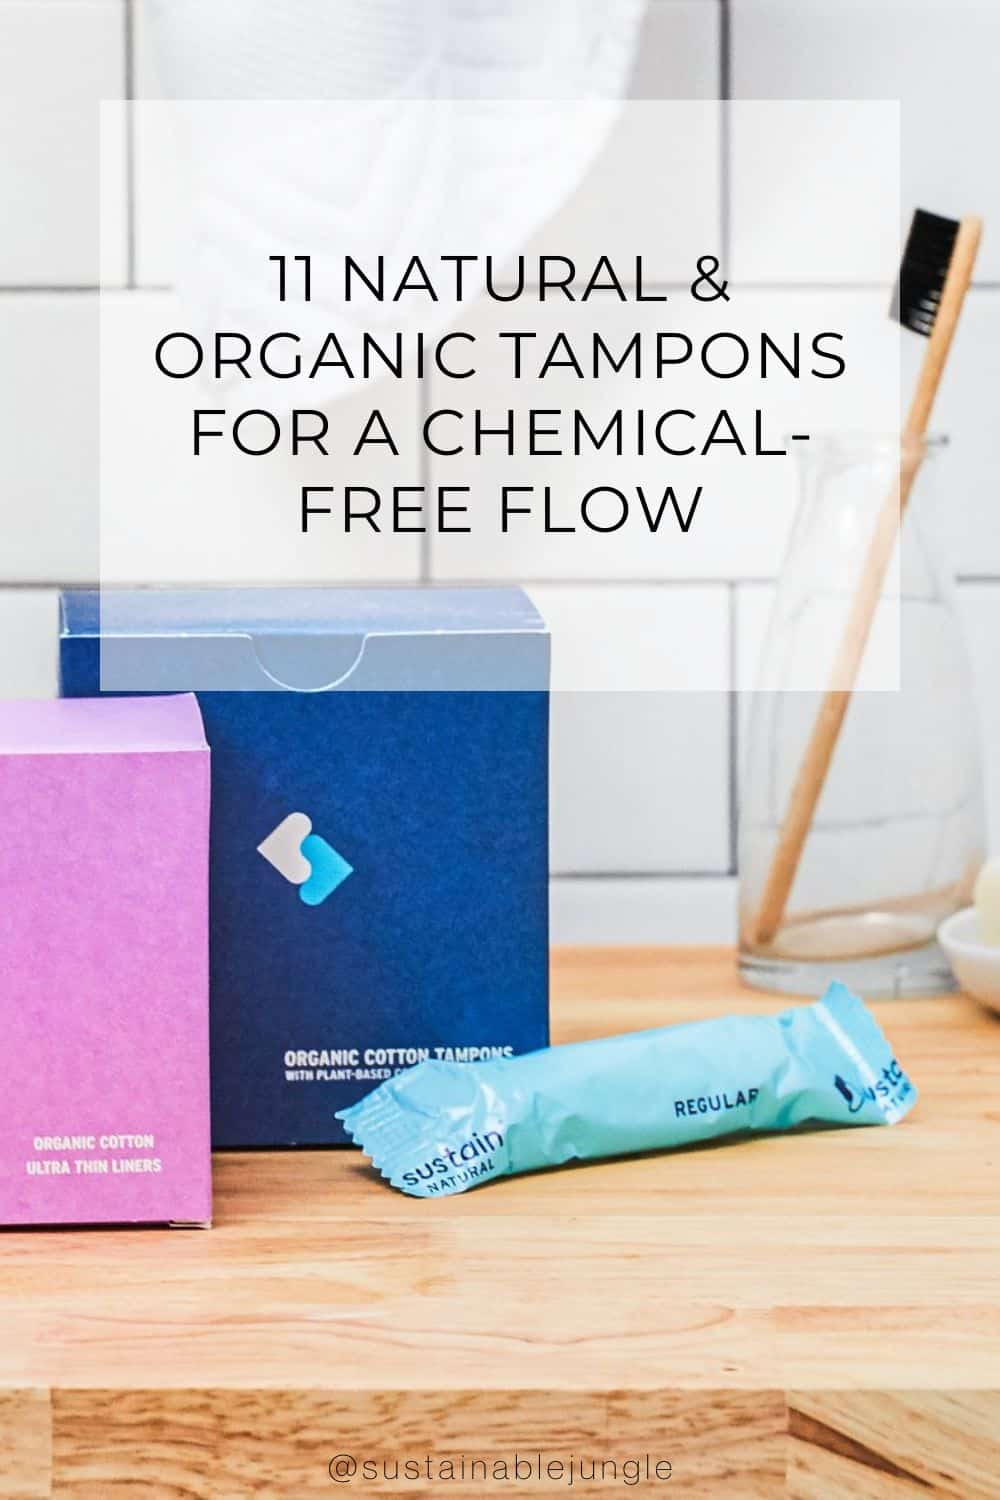 11 Natural & Organic Tampons For A Chemical-Free Flow Image by Sustain #organictampons #bestorganictampons #organicottontampons #coraorganictampons #whyorganictampons #naturalorganictampons #sustainablejungle